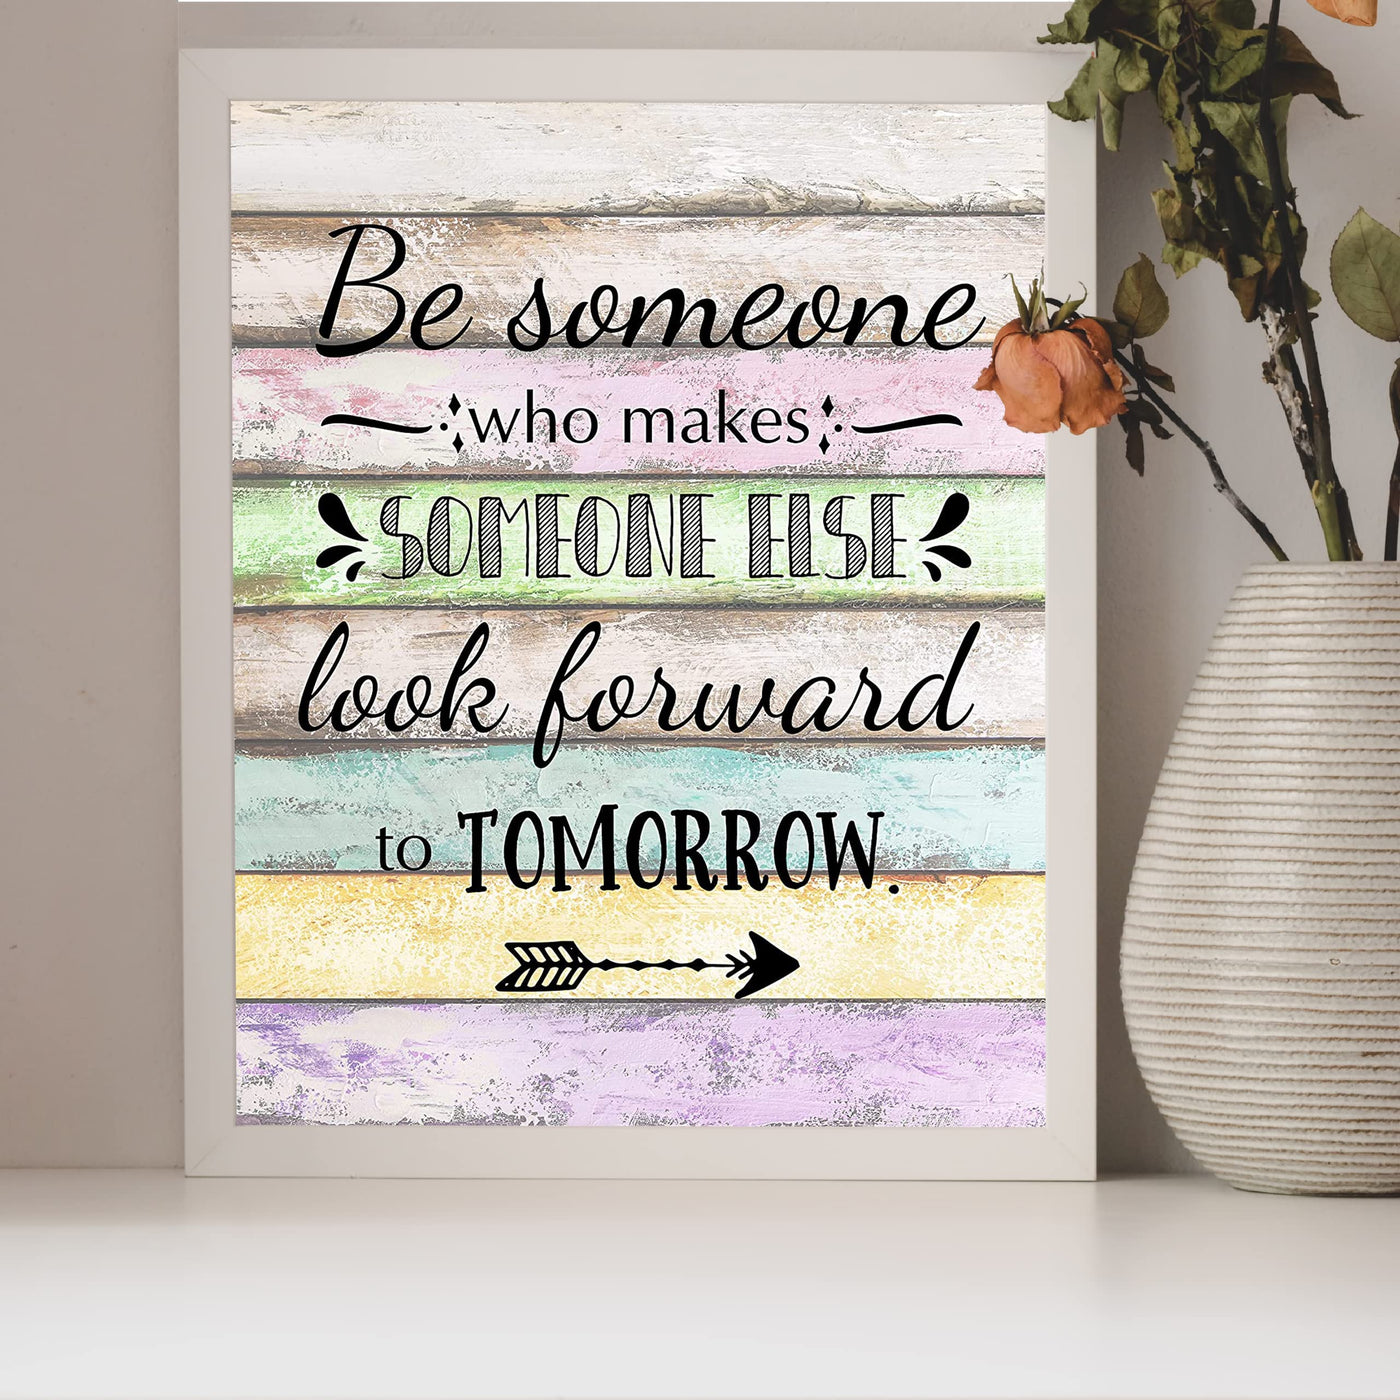 "Make Someone Else Look Forward To Tomorrow" Inspirational Quotes Wall Art Decor -8 x 10" Motivational Wood Design Print -Ready to Frame. Positive Decoration for Home-Office-Classroom Decor.